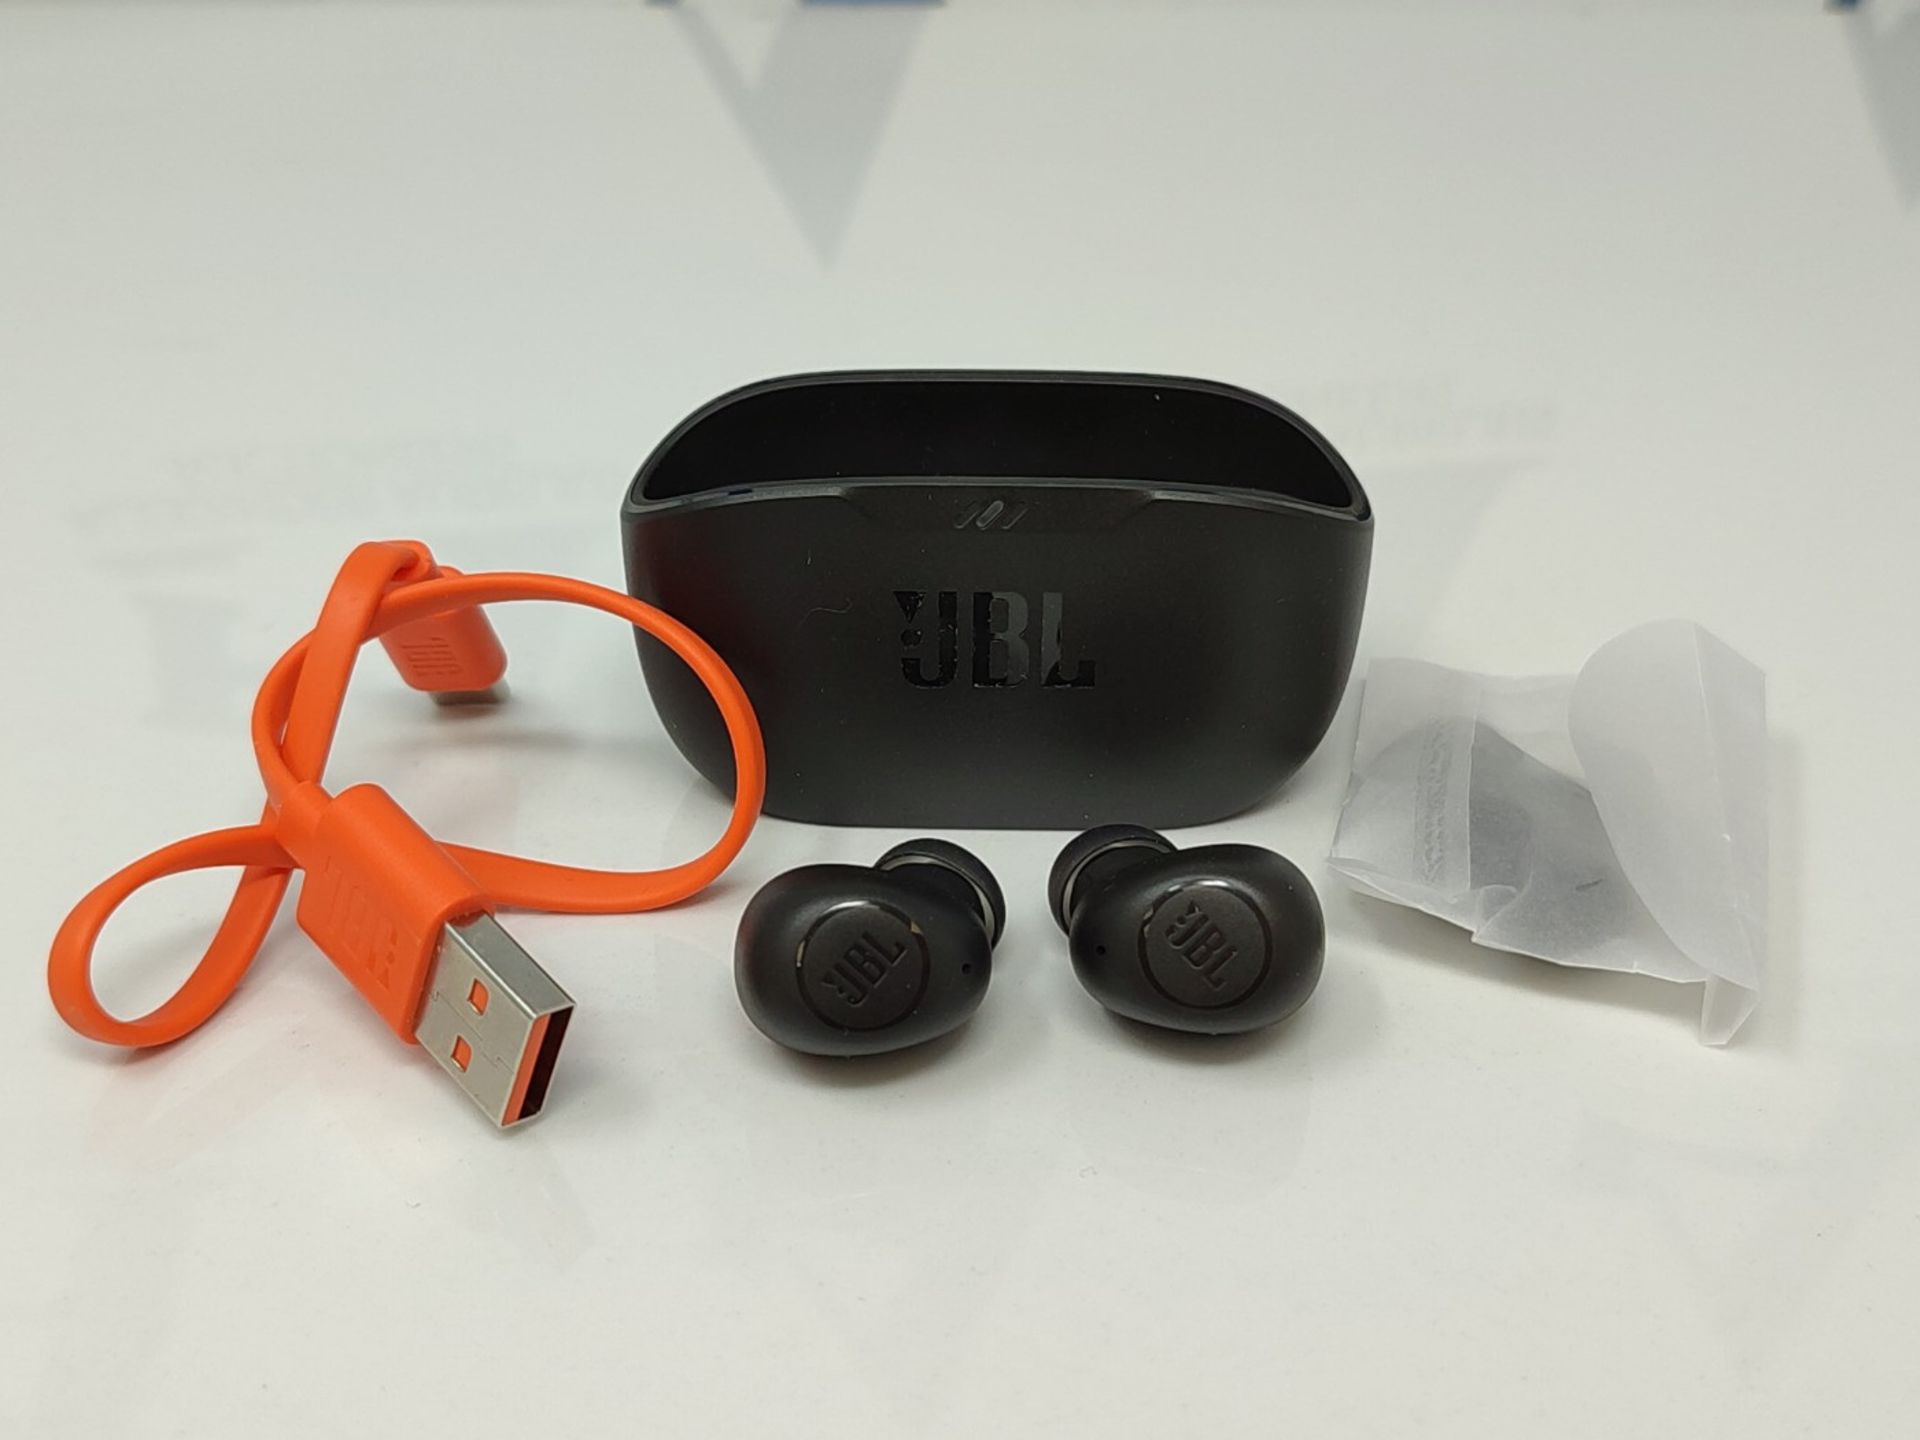 JBL Wave Buds Wireless In-Ear Headphones, Water Resistance IP54 and IPX2, Powerful Bas - Image 3 of 3